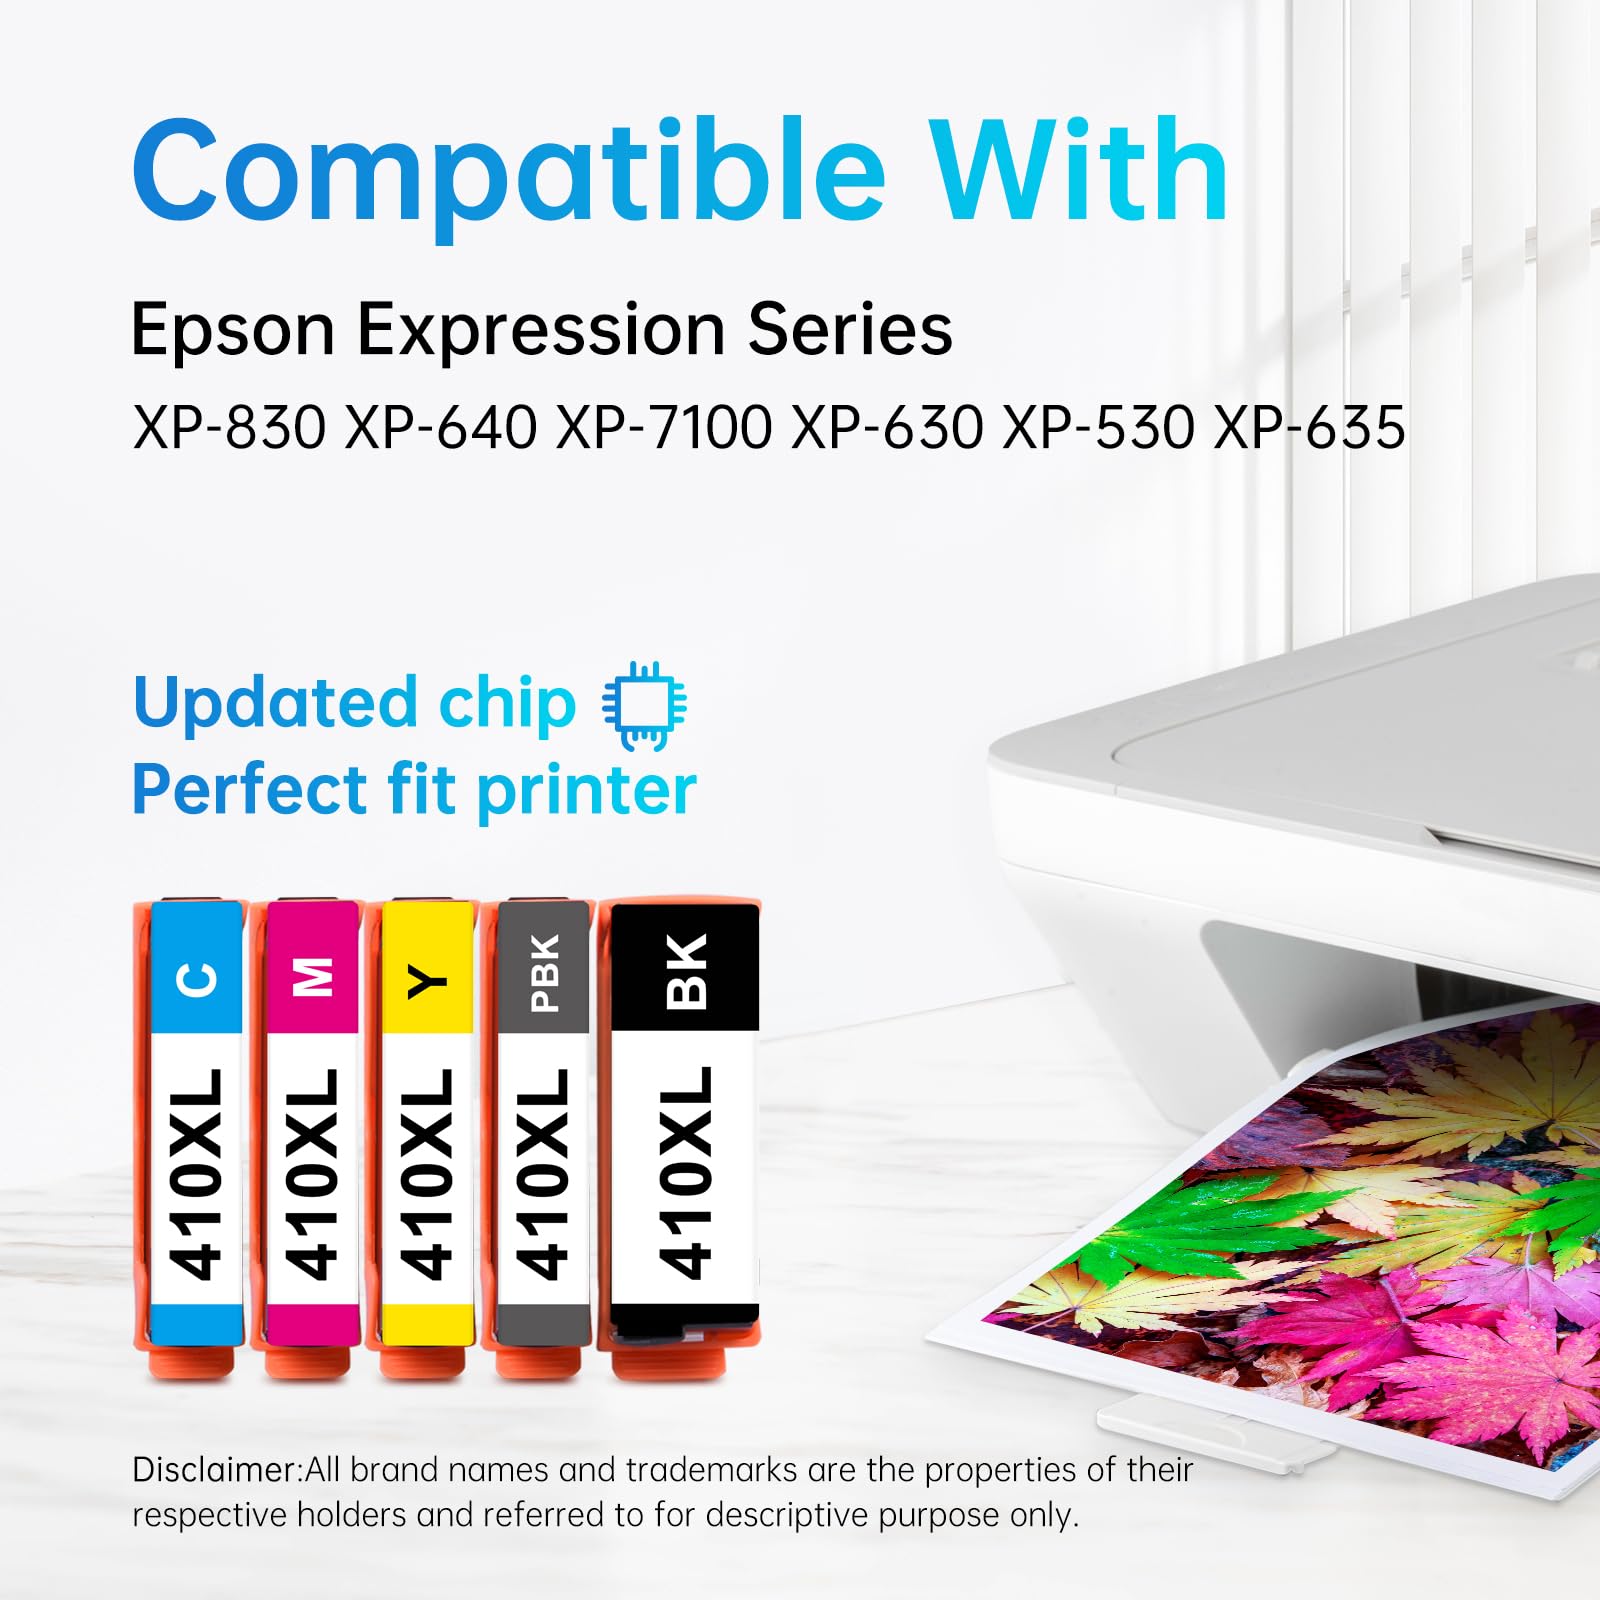 LEMERO 410XL ink cartridges compatible with Epson Expression Series printers like XP-830, XP-640, XP-7100, and more